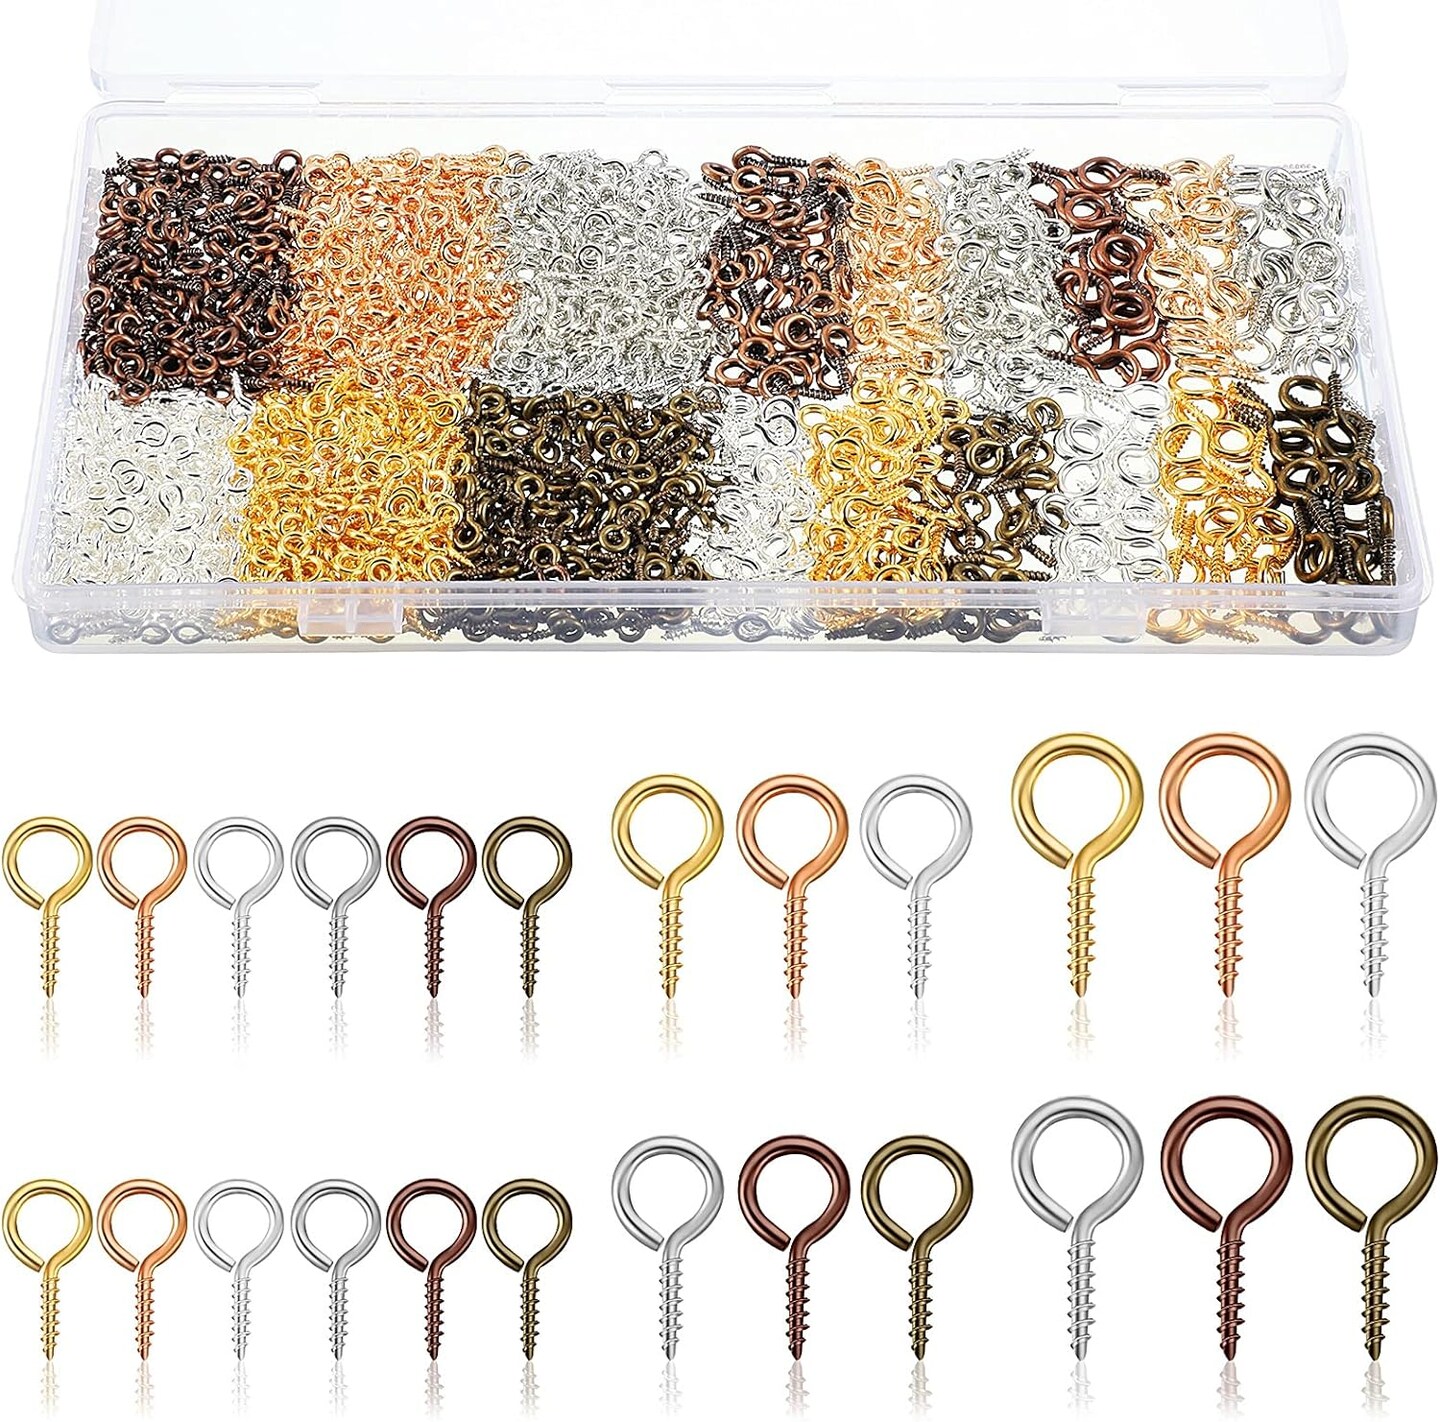 1200 Pcs 3 Sizes Small Eye Screws for Jewelry Making DIY Screw Eye Pins Small Eye Hooks Jewelry